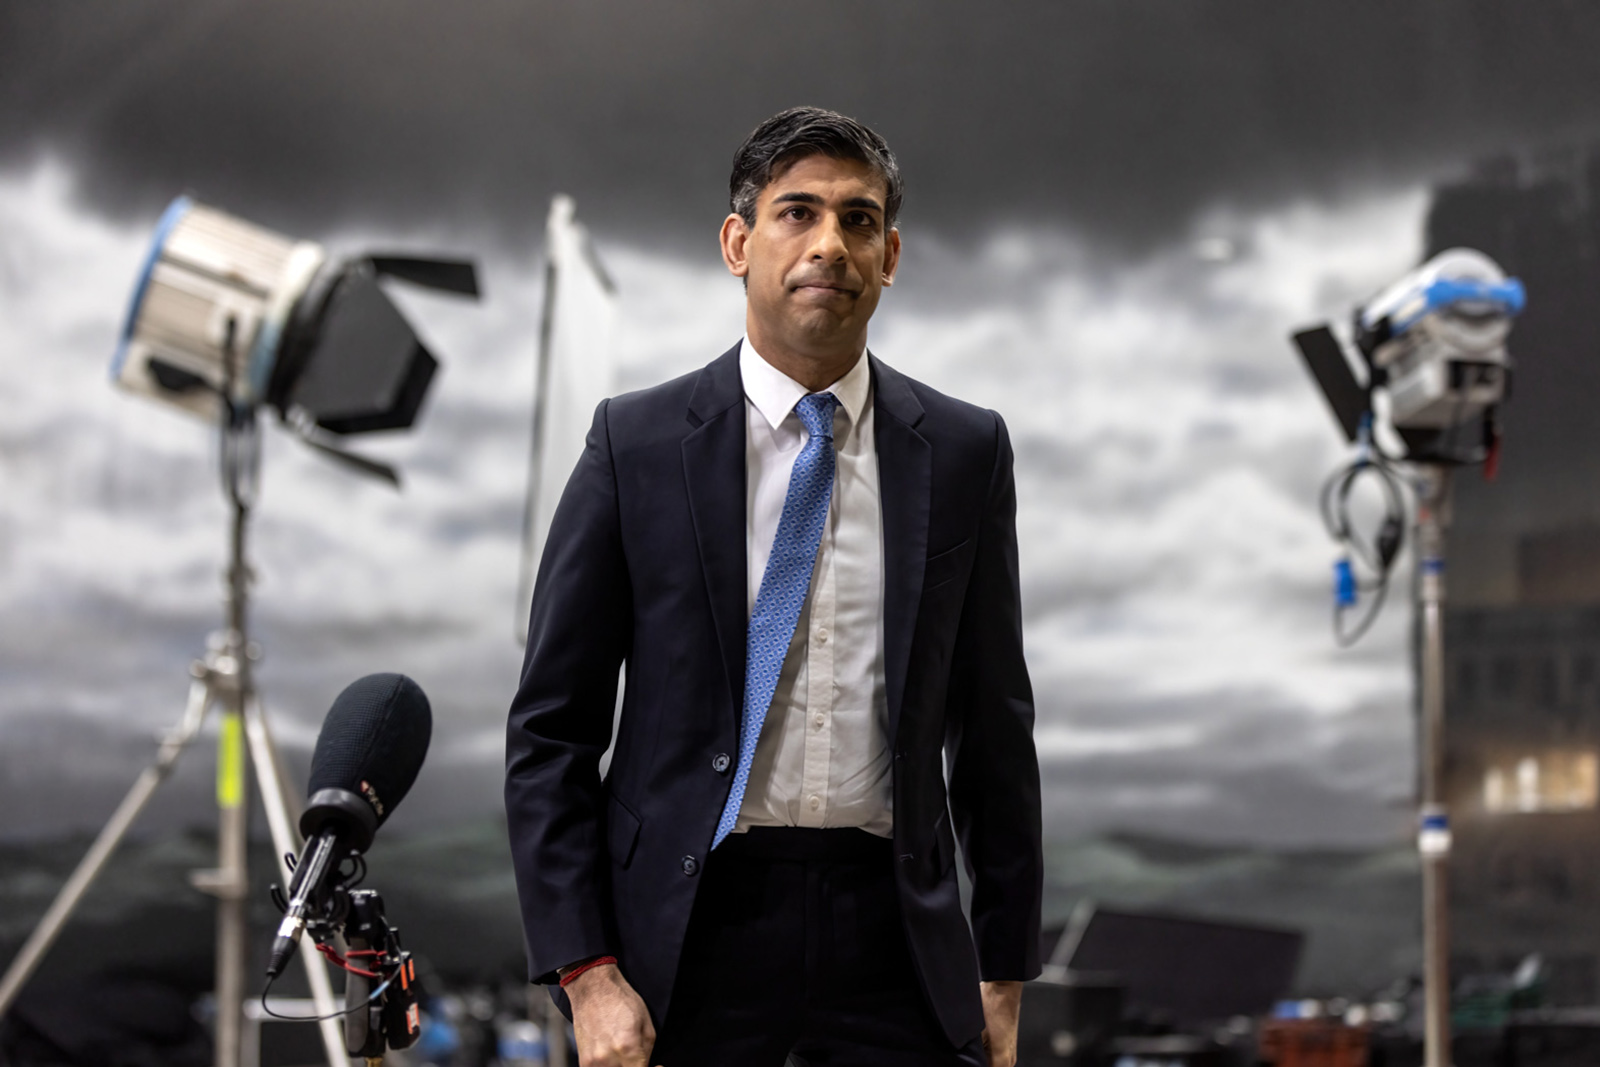 Prime Minister Rishi Sunak in front of a stormy green screen backdrop.